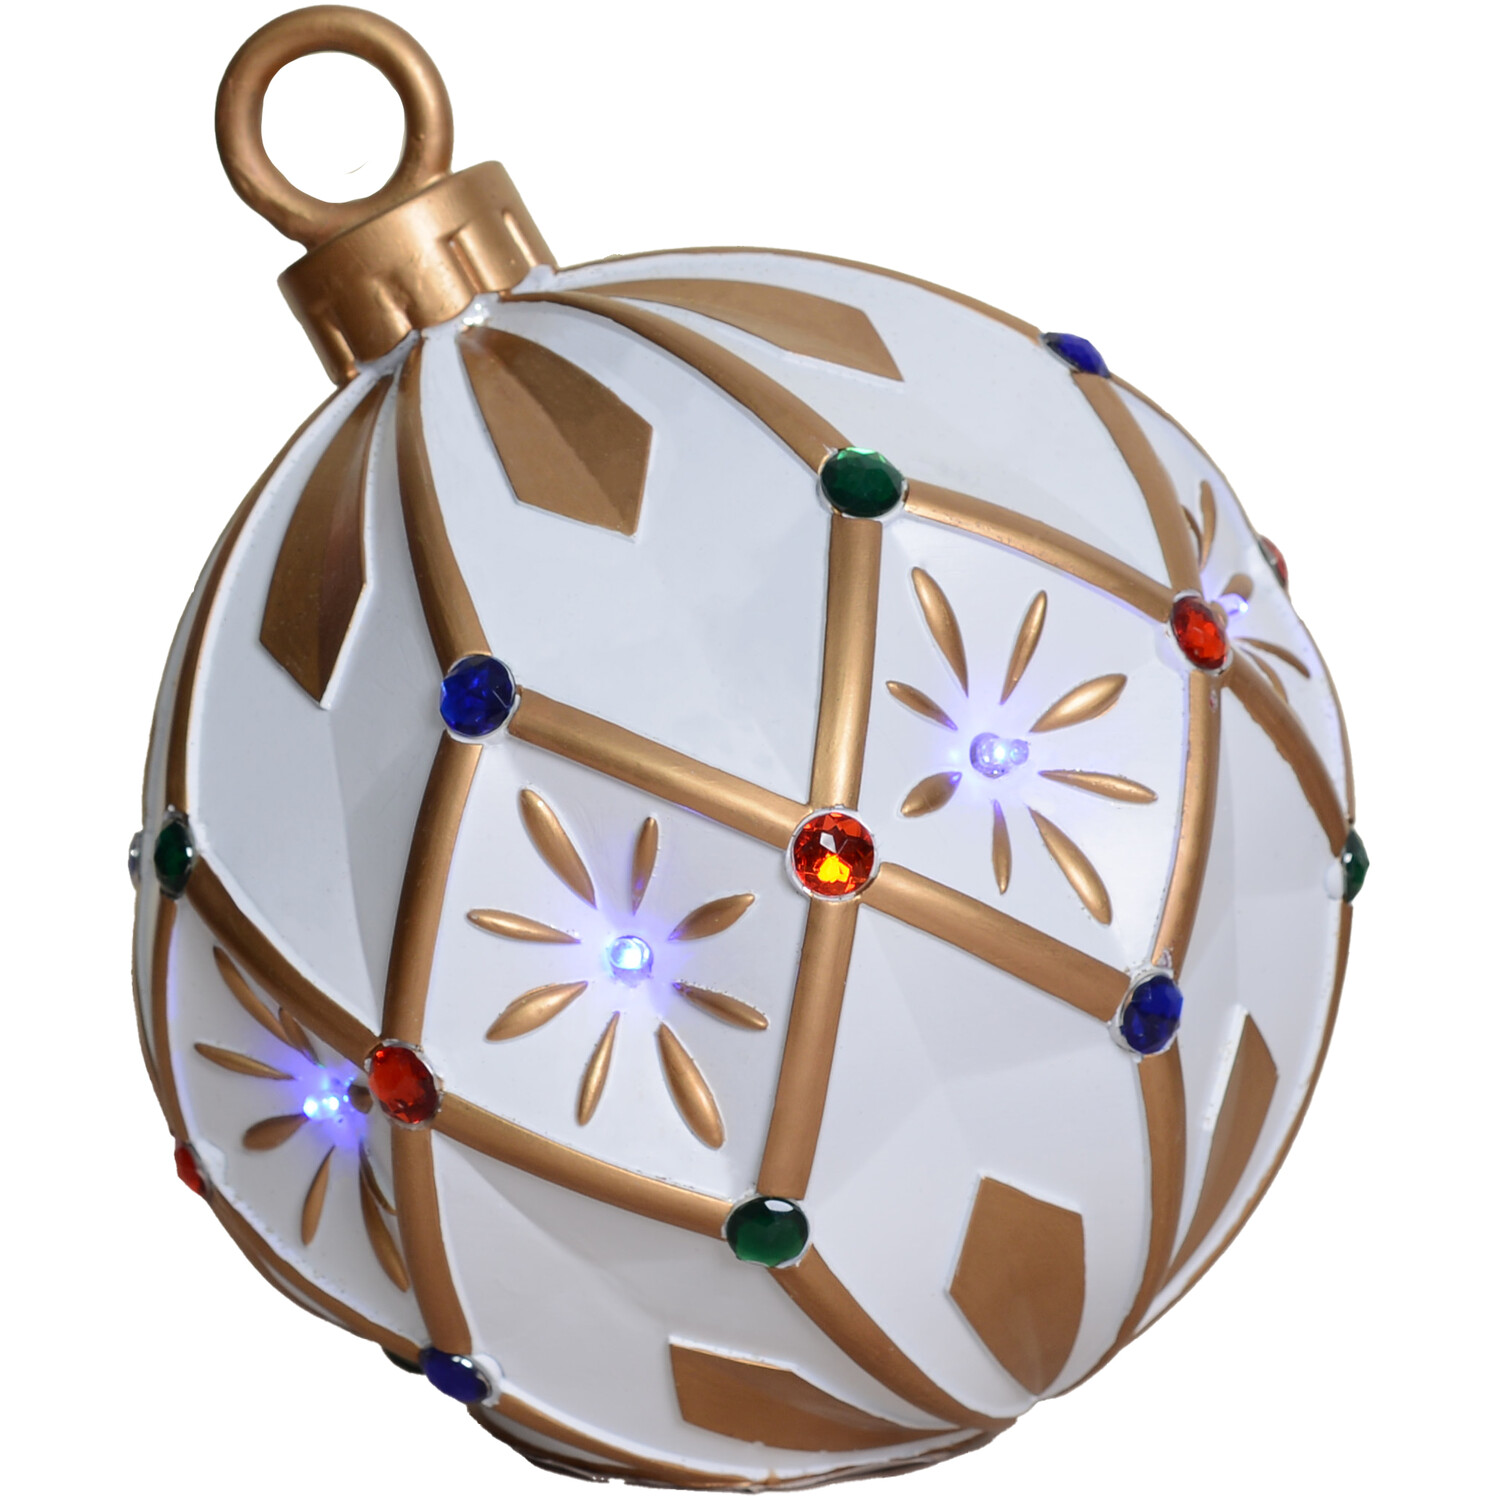 LED Colour Changing Bauble Ornament - White Image